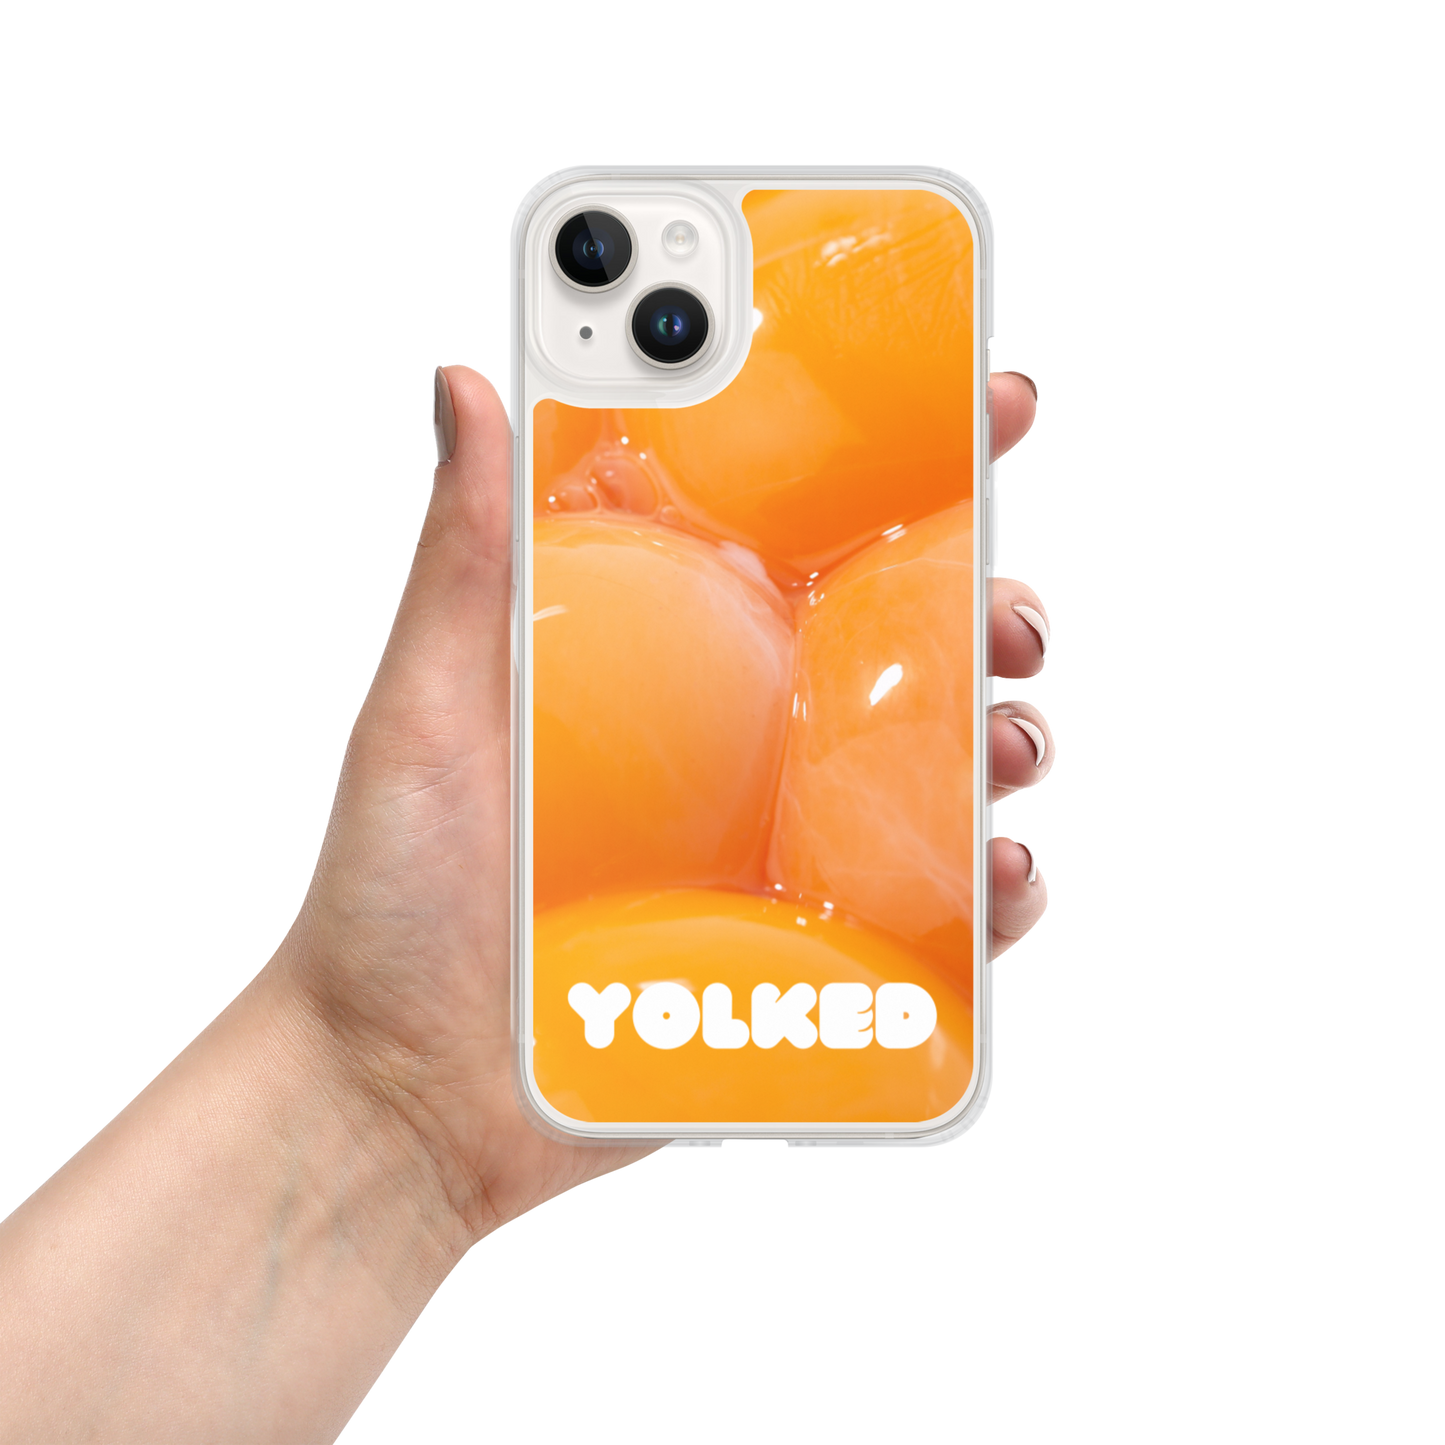 YOLKED iPhone Case